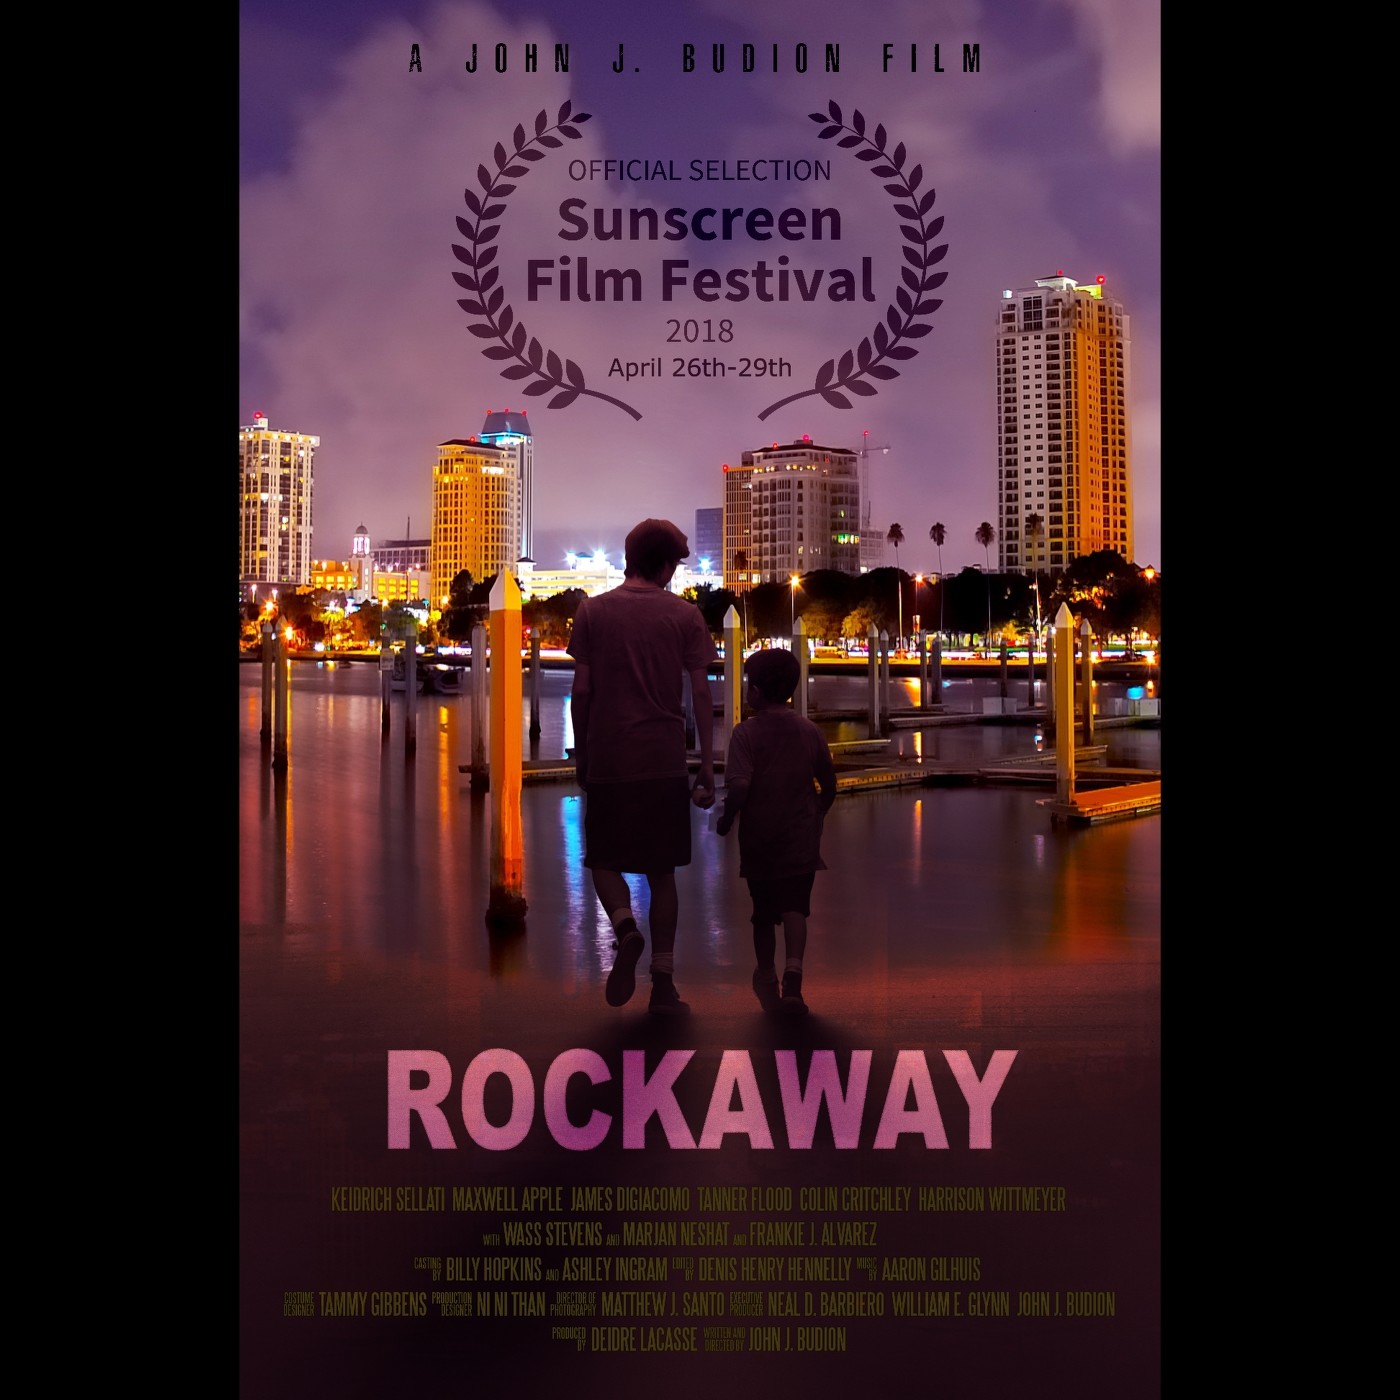 “Rockaway" will make its Florida premiere at the Sunscreen Film Festival on April 28 at 4 p.m. It has already garnered a lot of buzz after success at other festivals.